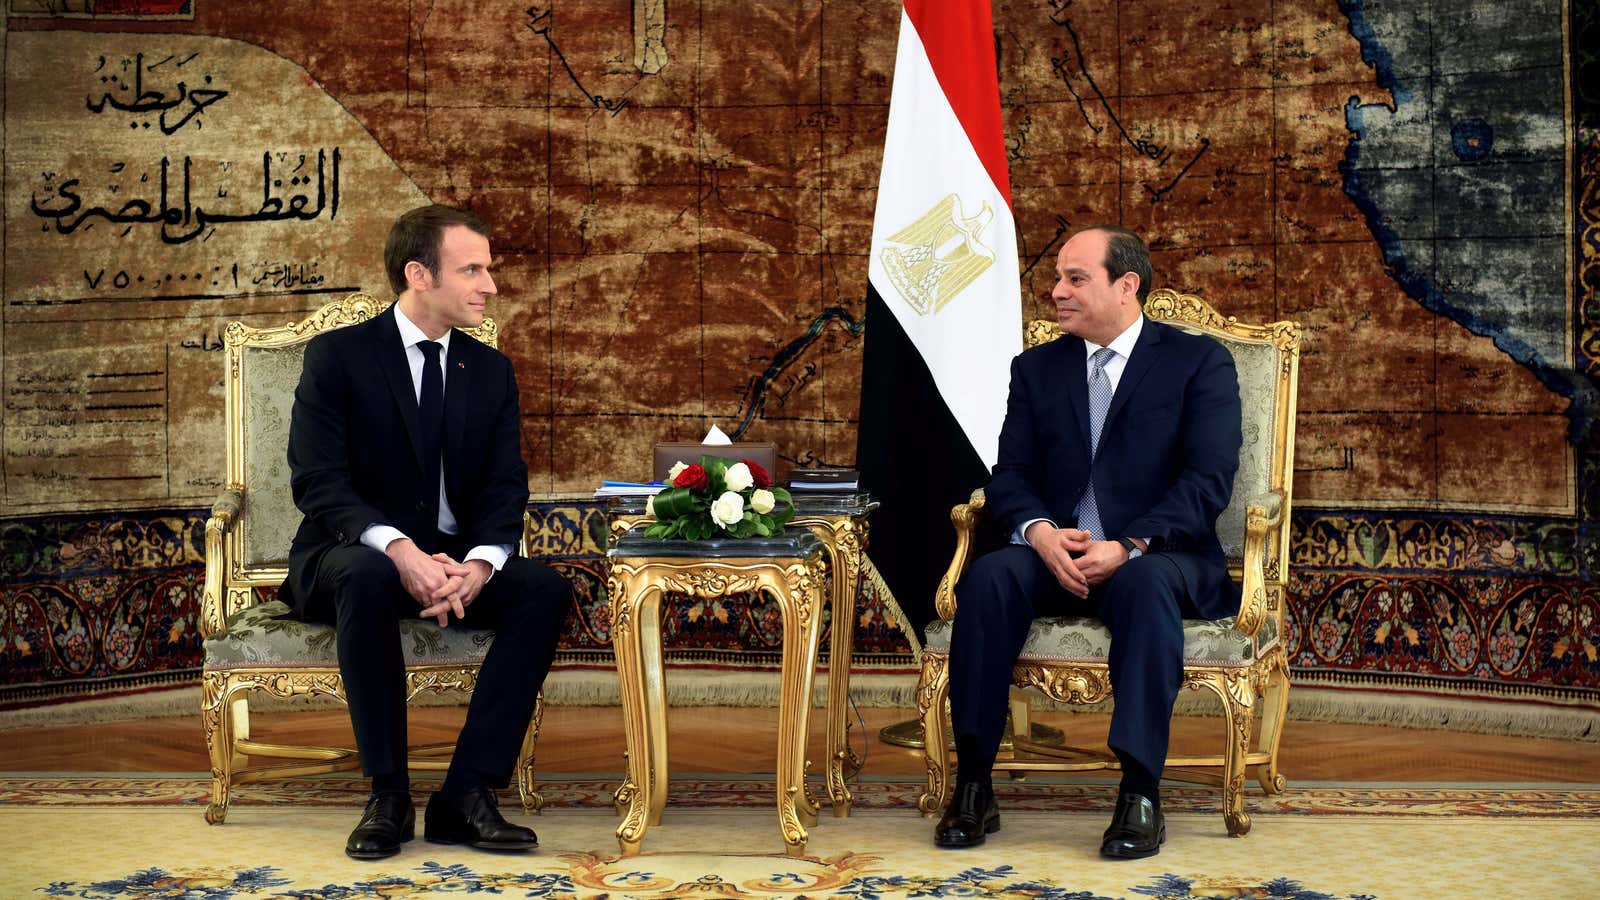 Egypt’s president al-Sisi with French president Macron at the presidential palace Cairo, Egypt, Jan. 28, 2019